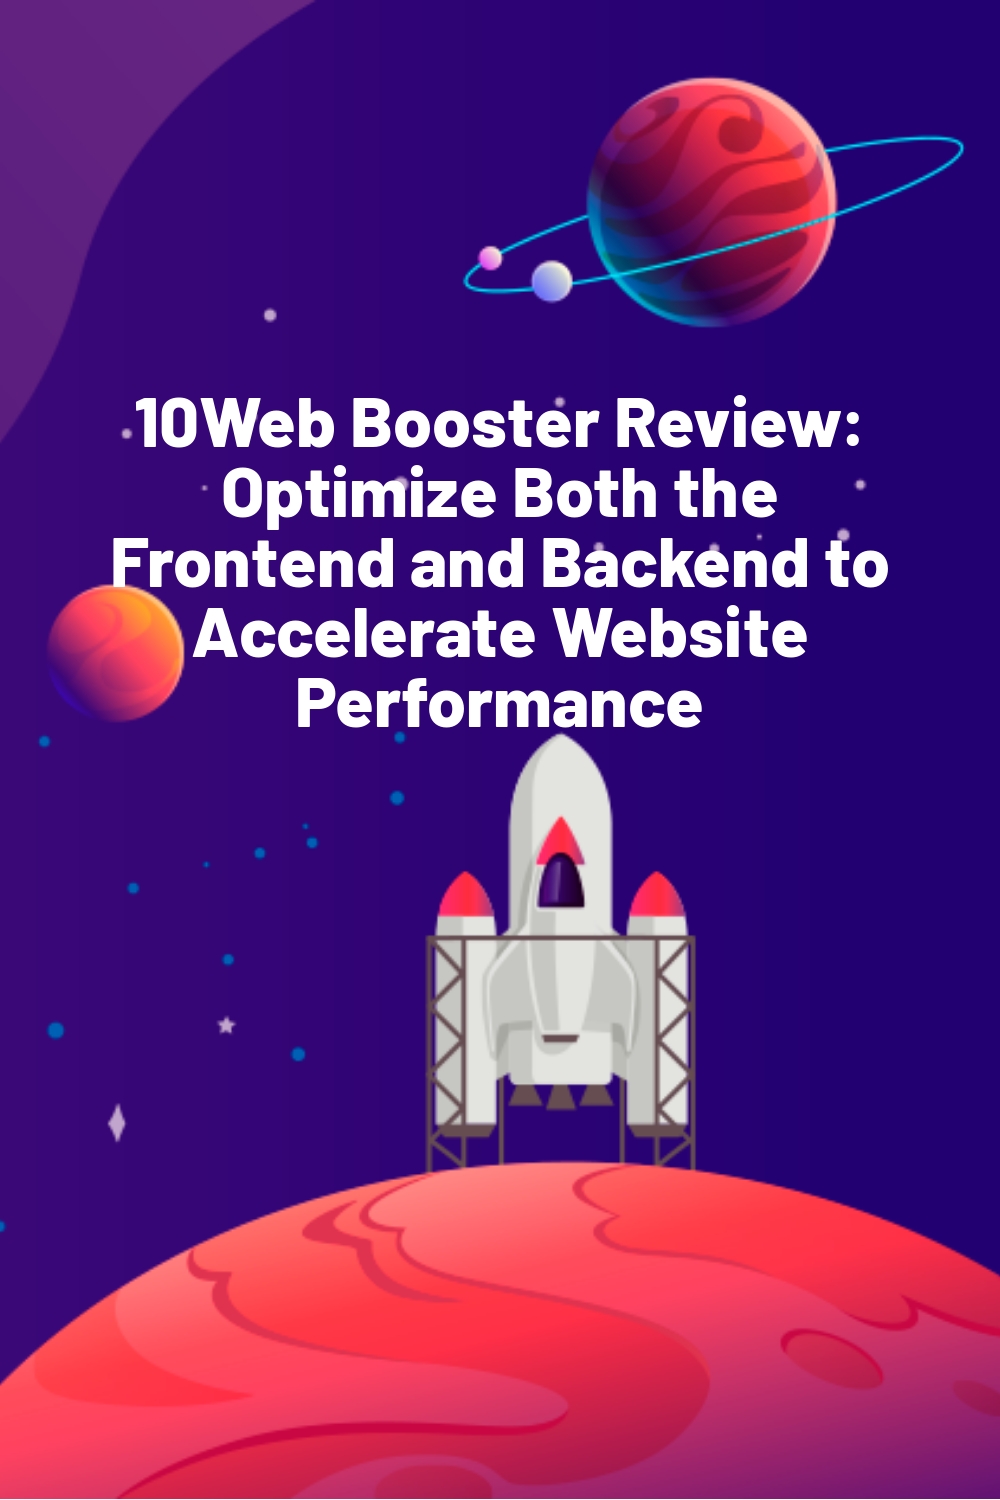 10Web Booster Review: Optimize Both the Frontend and Backend to Accelerate Website Performance